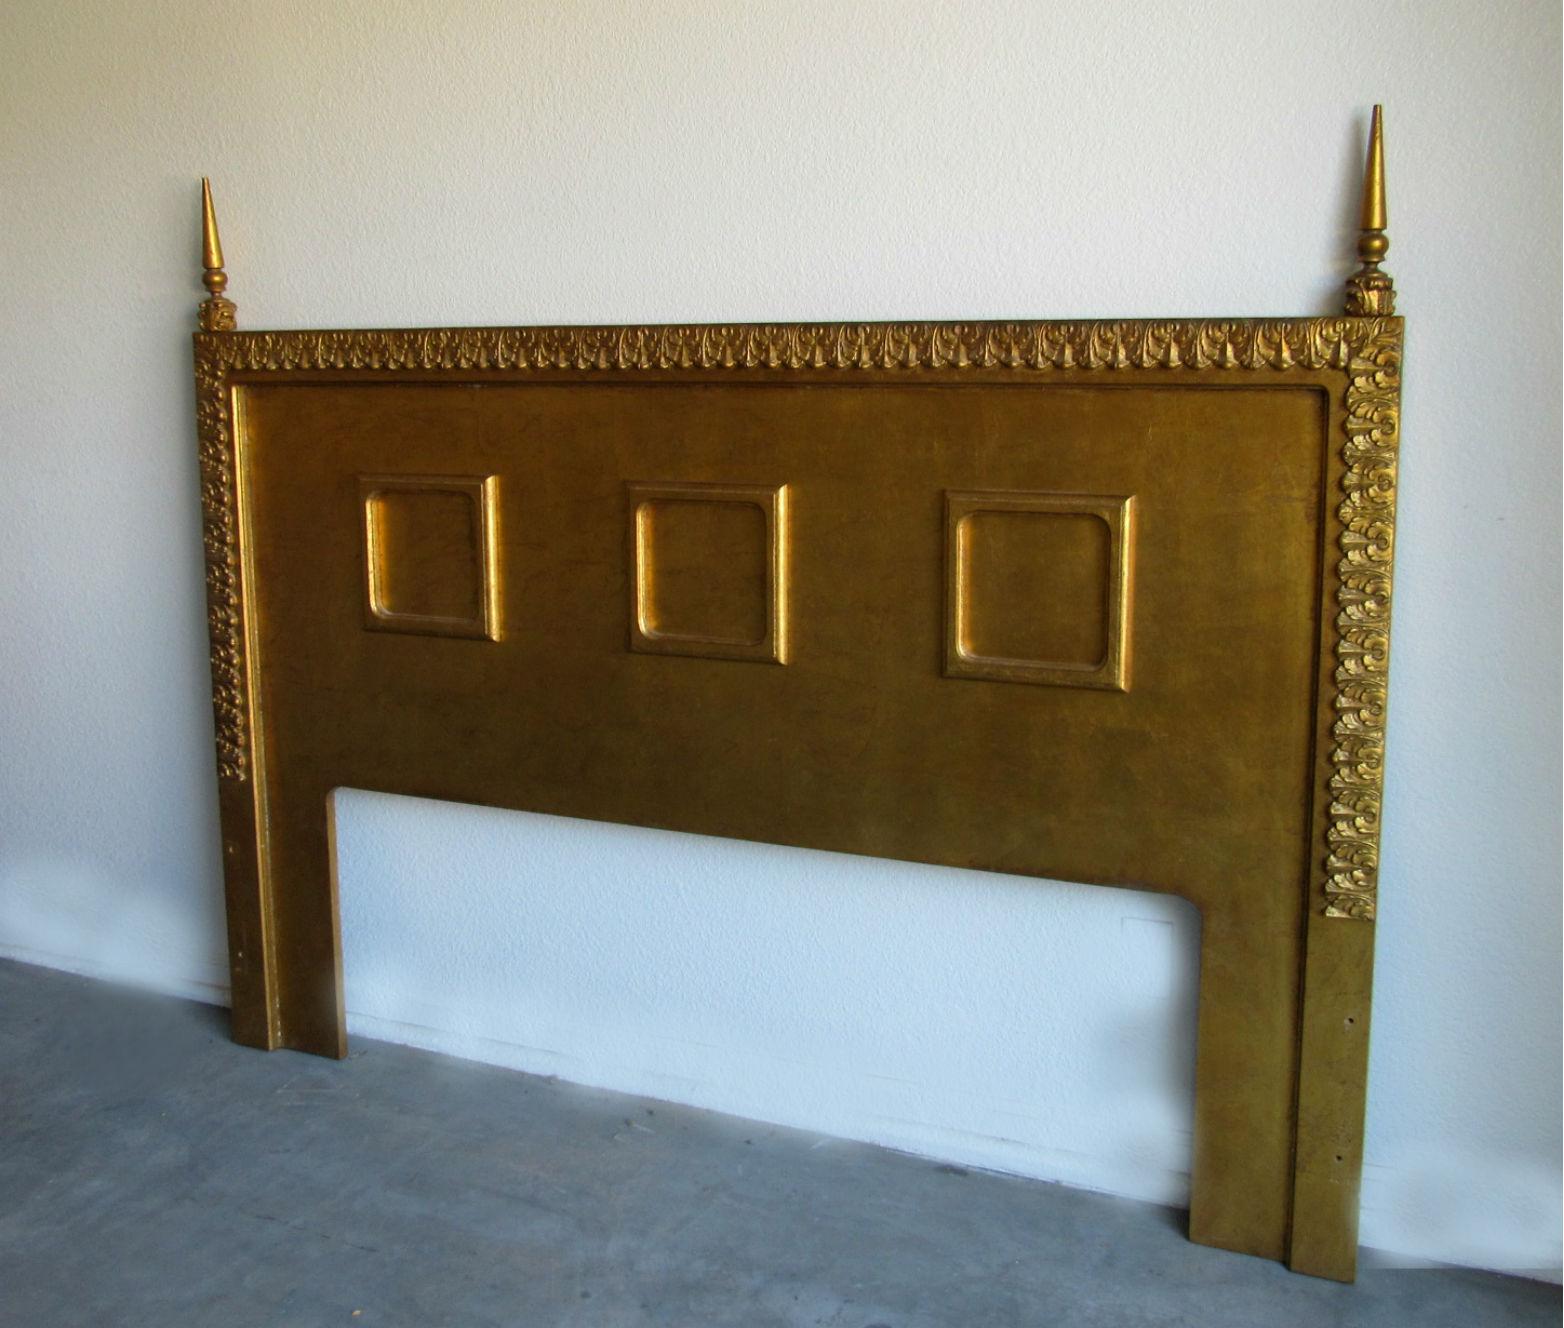 Neoclassical gilt king size headboard, circa the 1960s. Designed and manufactured by David Zeren of California in the 1960s, this king-size headboard carved of mahogany and covered in gold leaf.